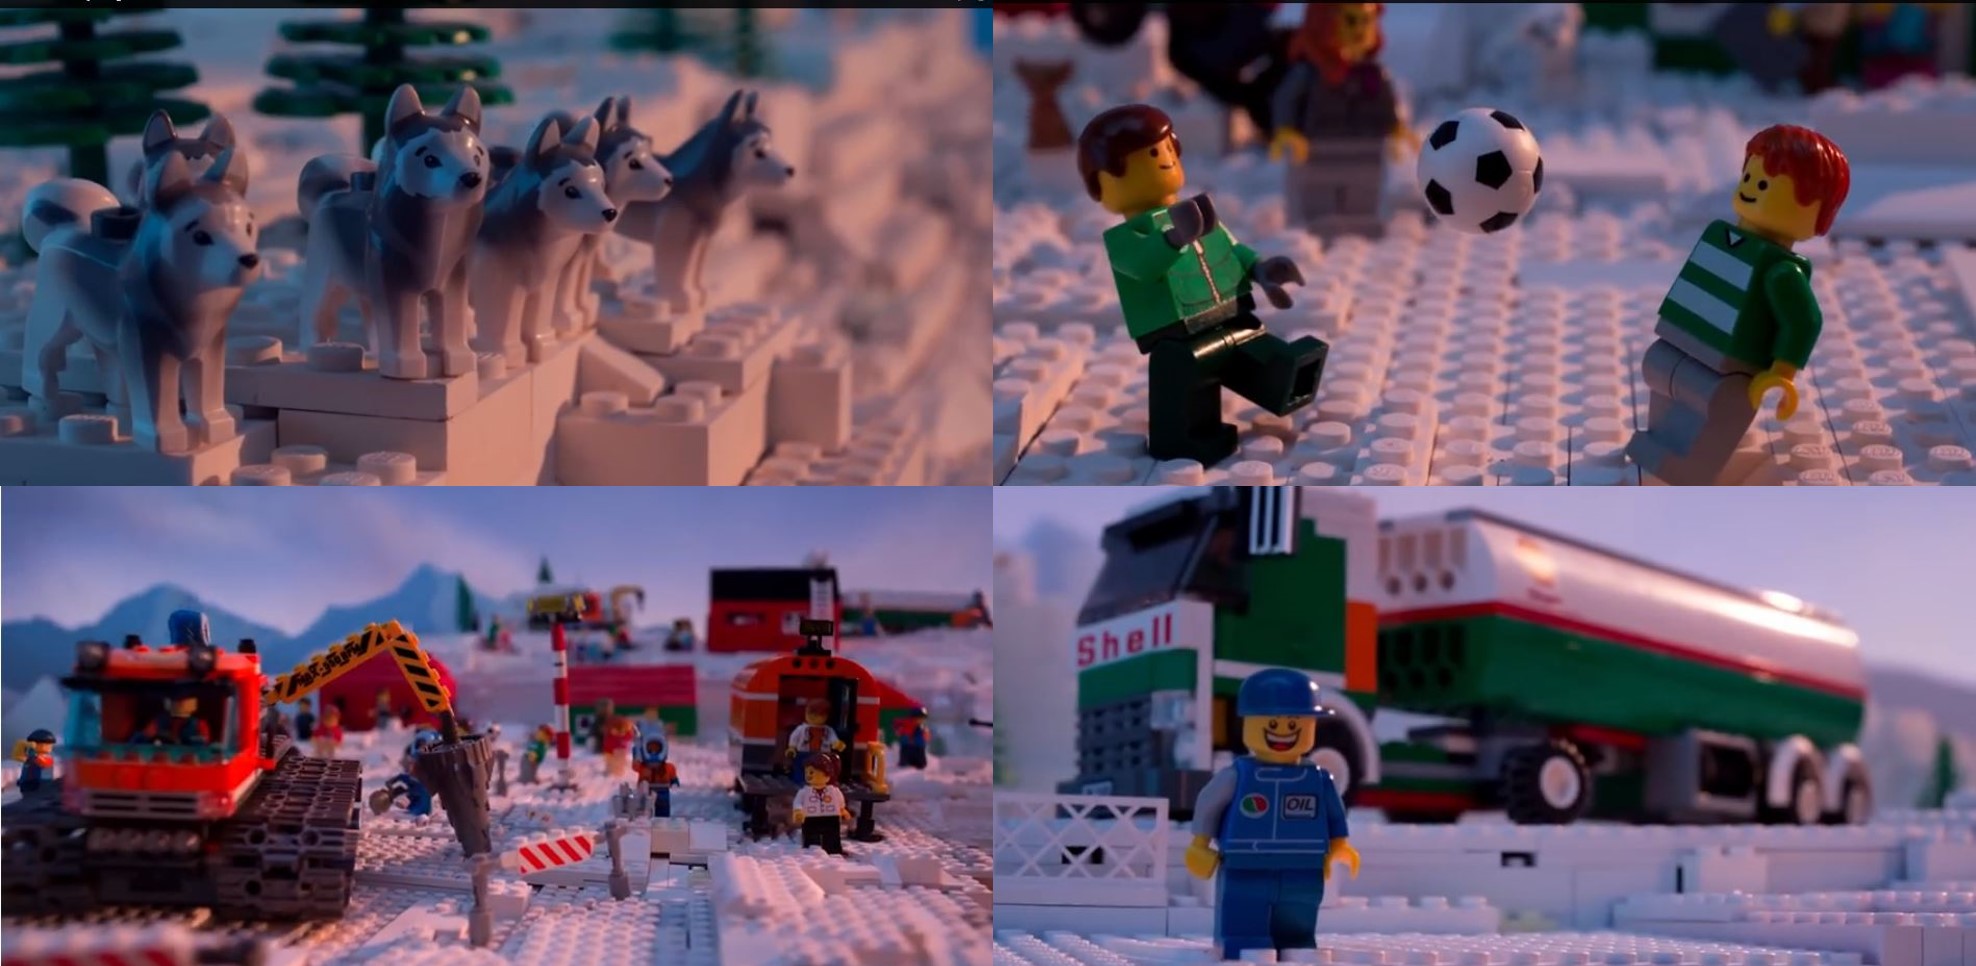 Lego Ends Years Of With Shell Over This Video | Pregnancy in Singapore